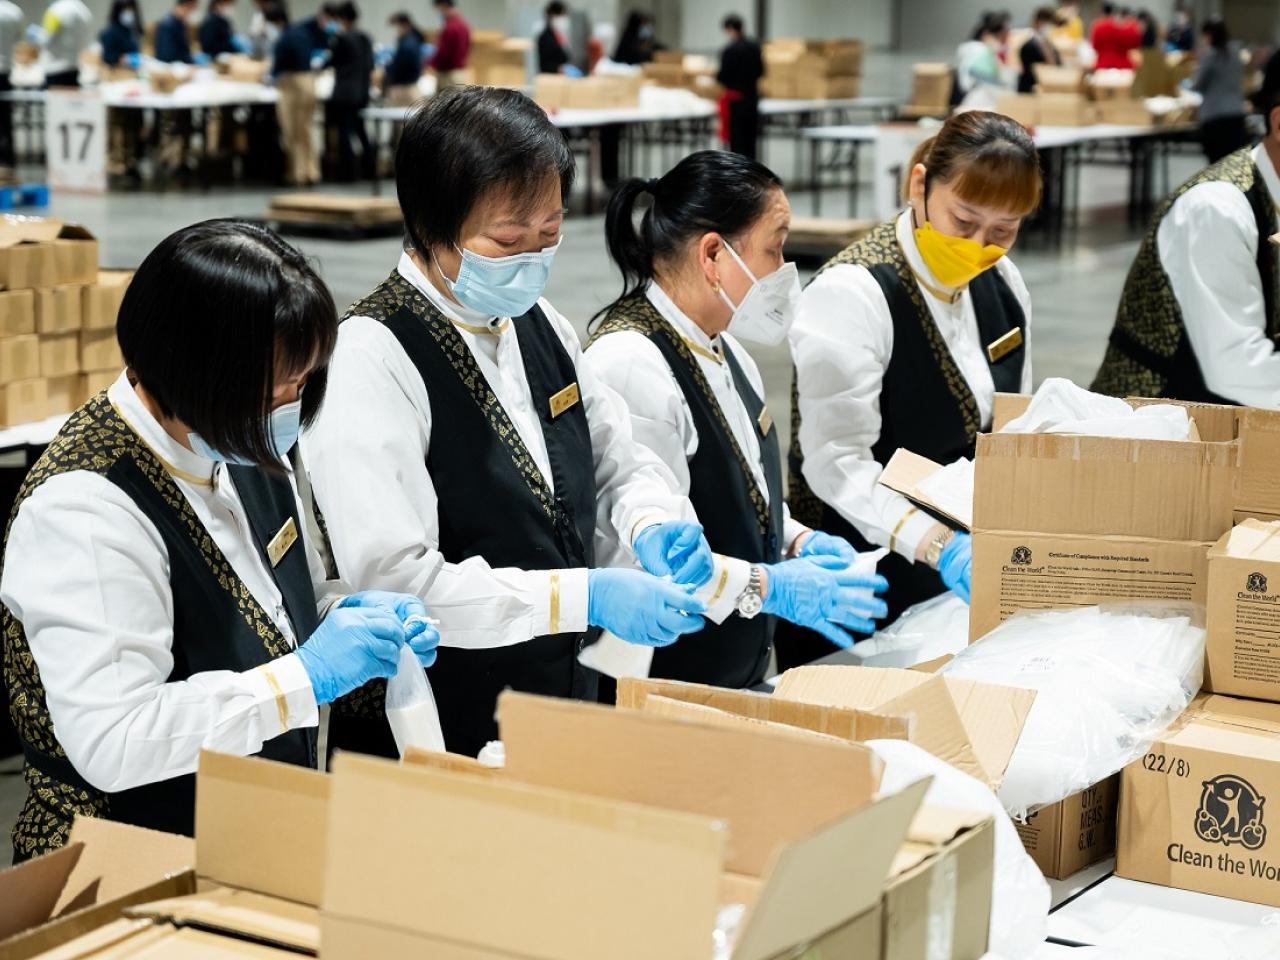 People in masks and gloves working with boxes on tables